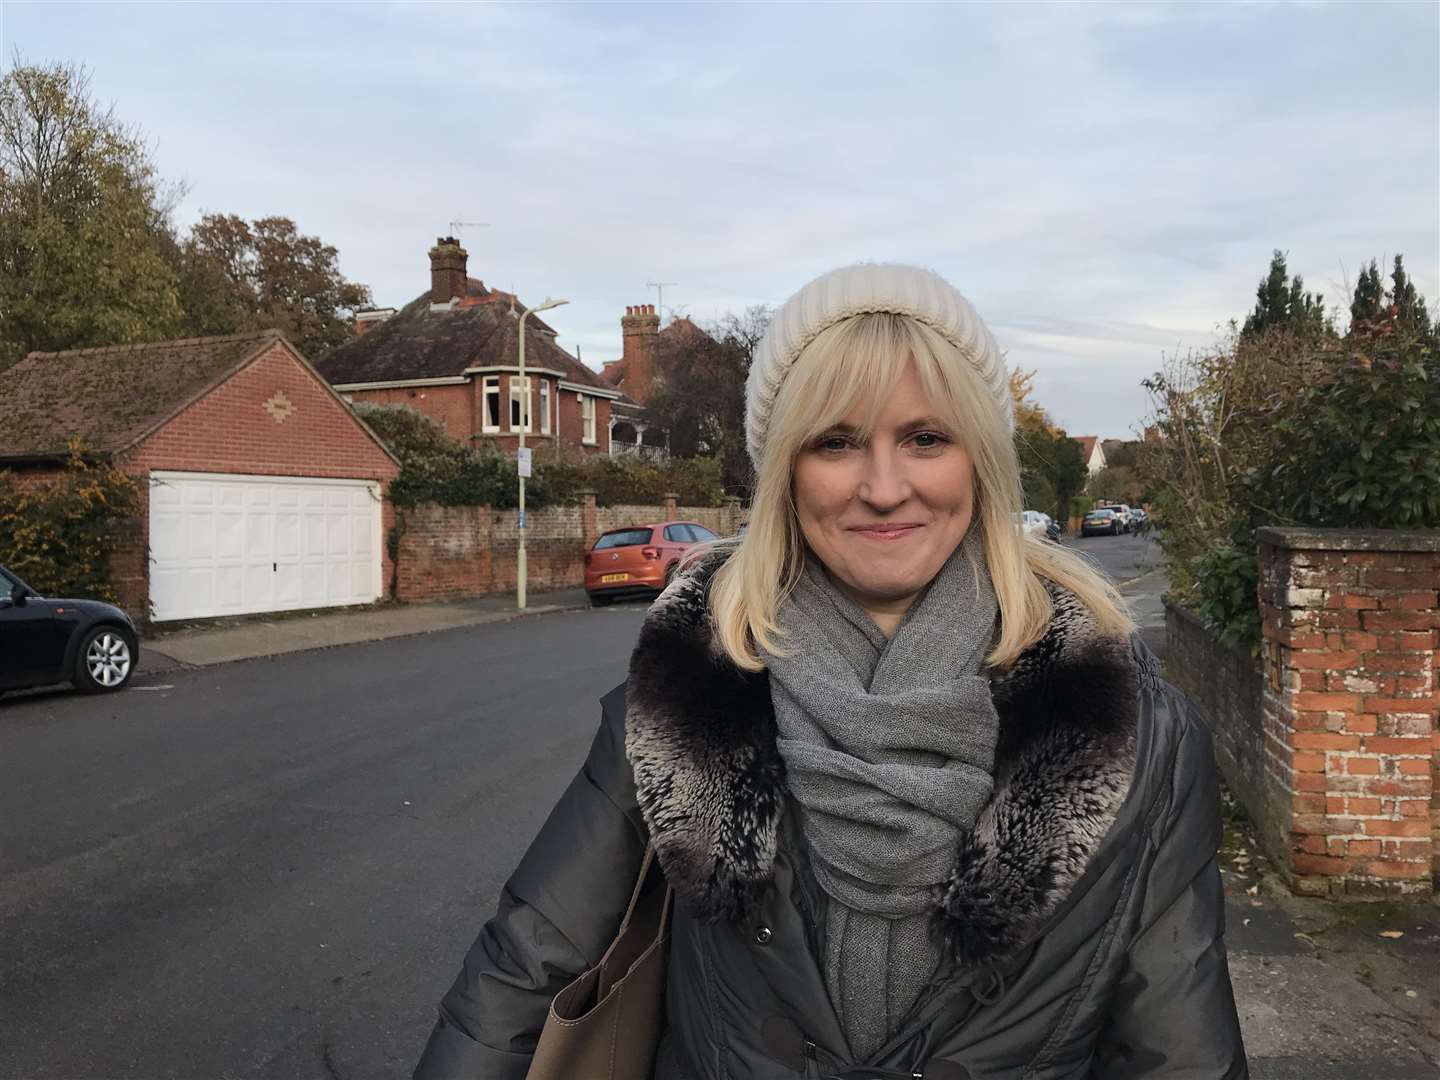 Rosie Duffield says she is "cautiously optimistic" ahead of the poll